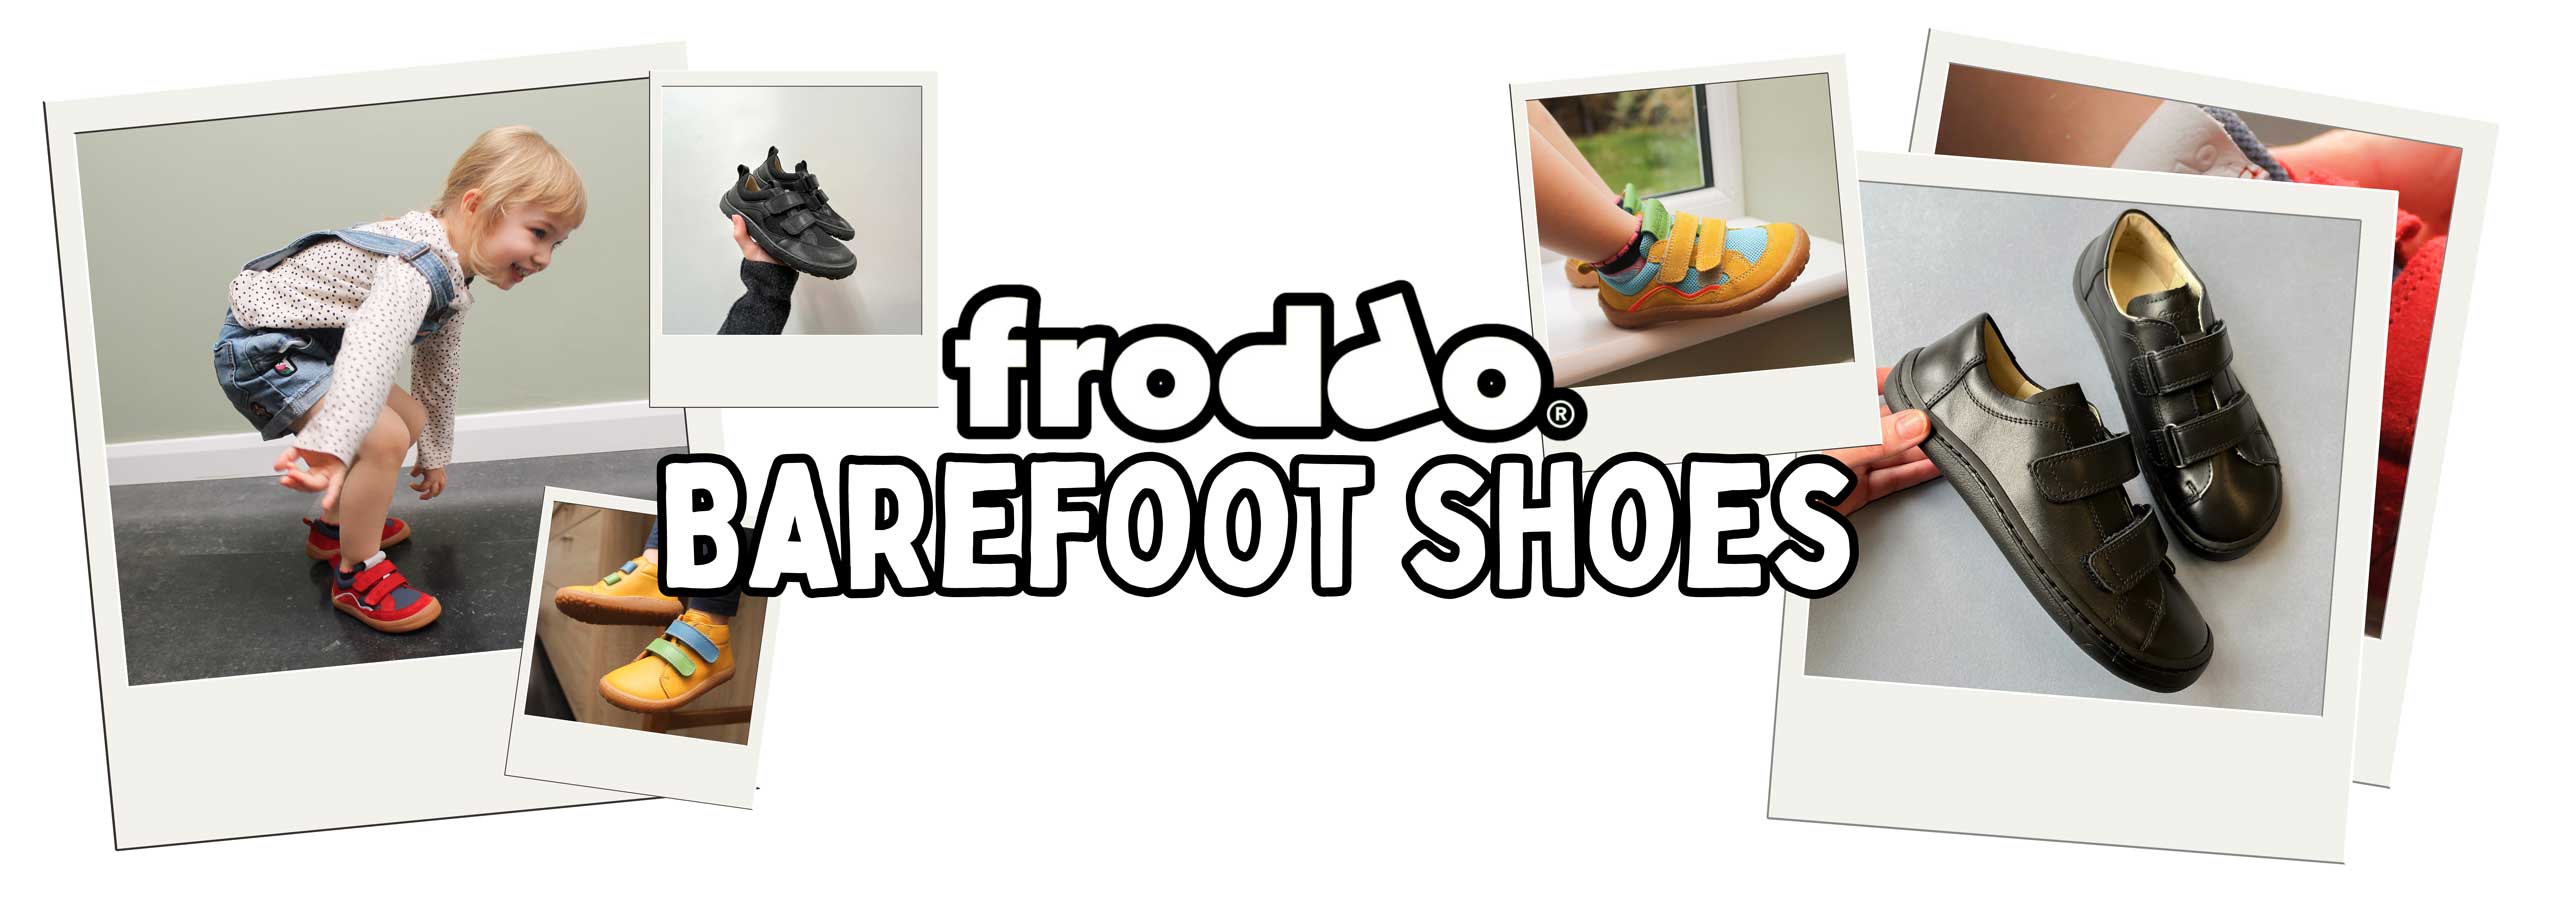 froddo barefoot shoes ss24 banner